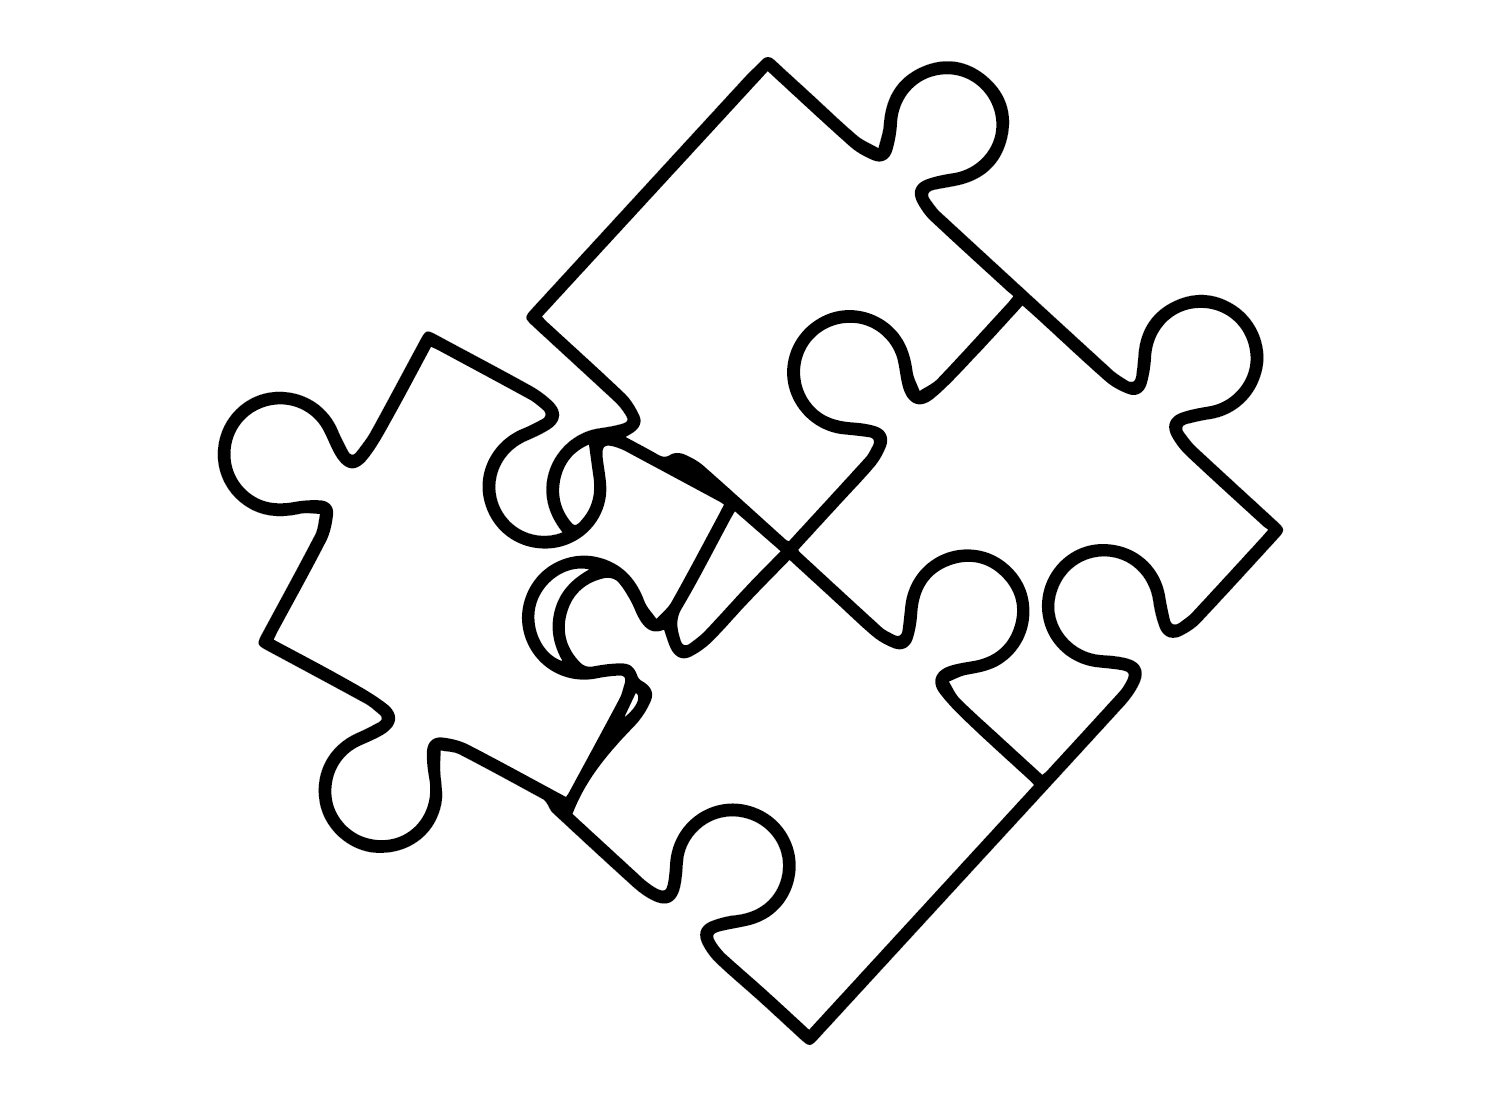 The Jigsaw Puzzle Free Coloring Page